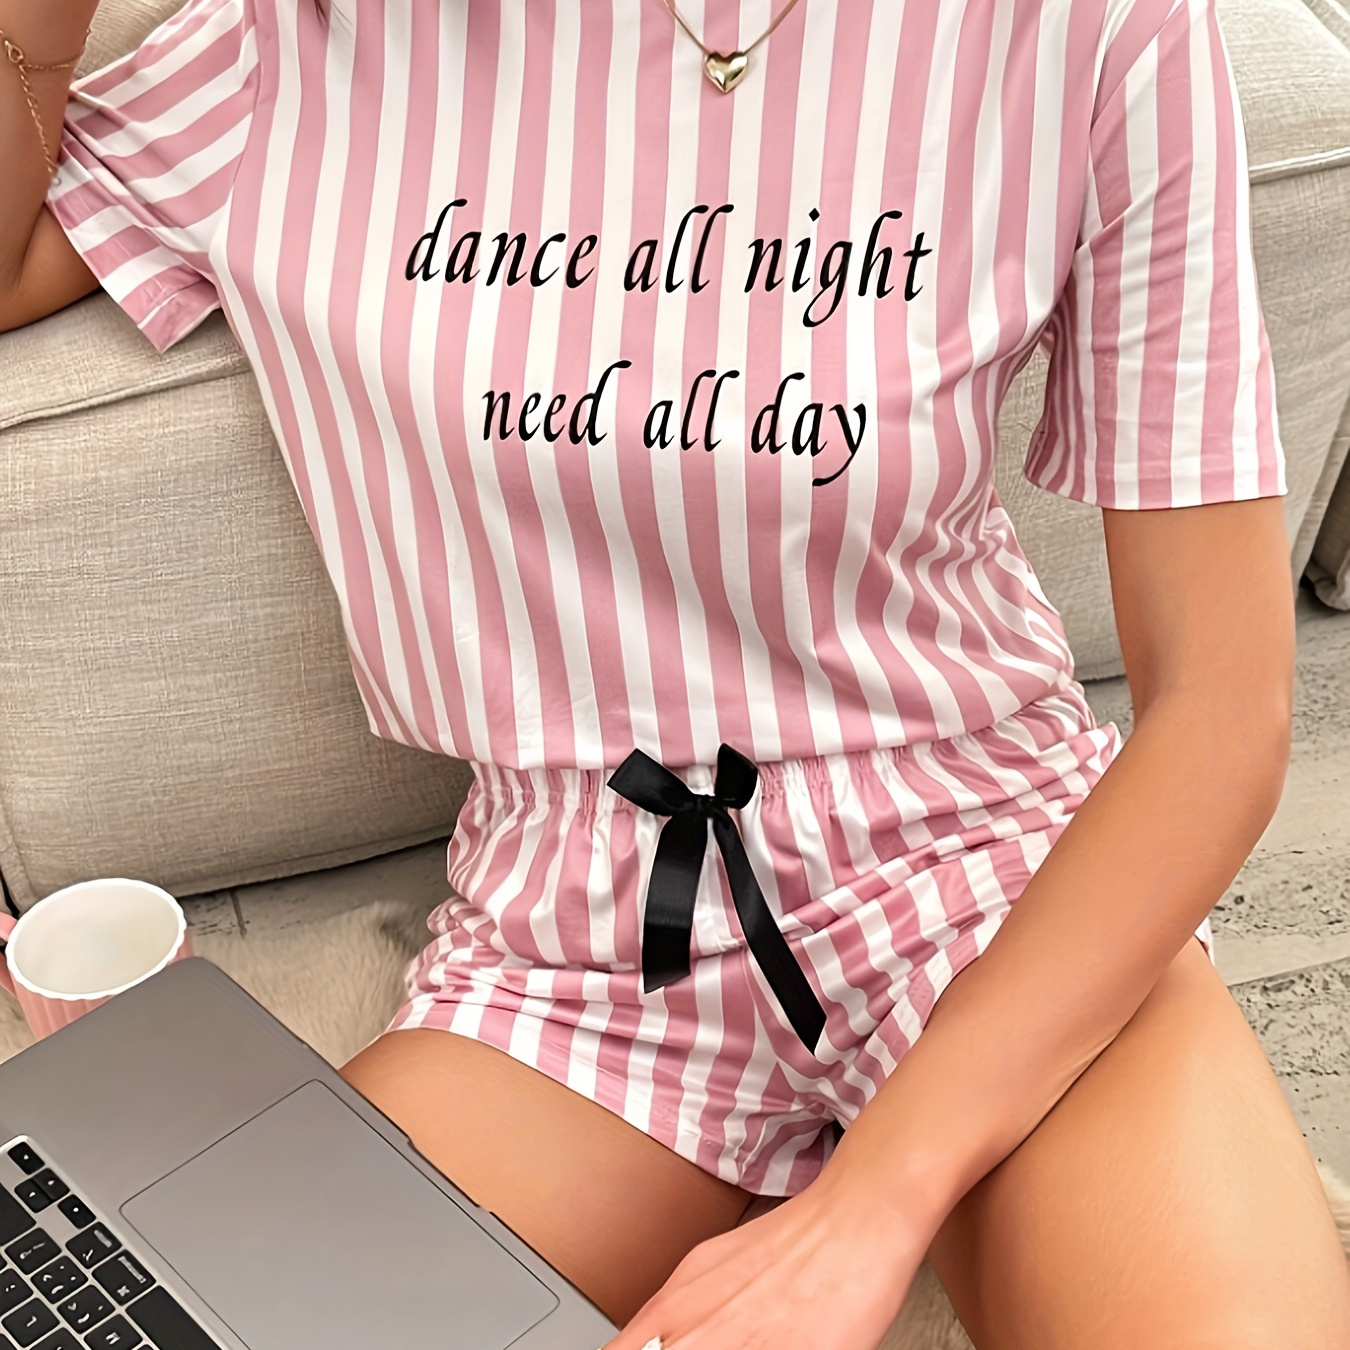 

Women's Stripe & Slogan Print Casual Pajama Set, Short Sleeve Round Neck Top & Bow Shorts, Comfortable Relaxed Fit